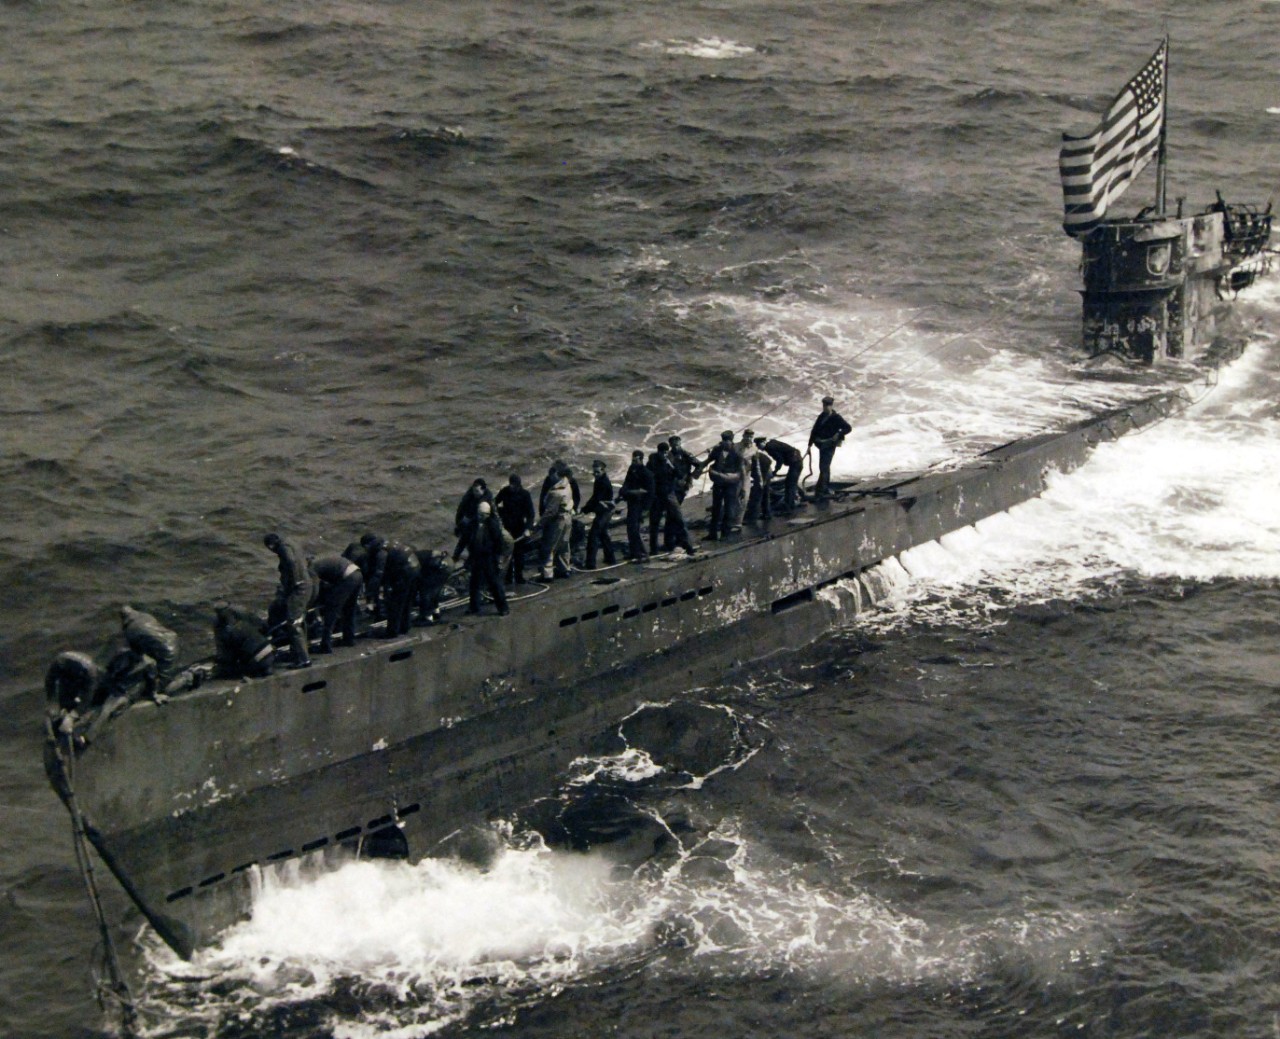 The boarders struggle to secure a tow line to U-505’s bow, while other men lay below and desperately fight to save the boat as she takes on water, 4 June 1944. (U.S. Navy Photograph 80-G-49172, National Archives and Records Administration, Still Pictures Division, College Park, Md.)